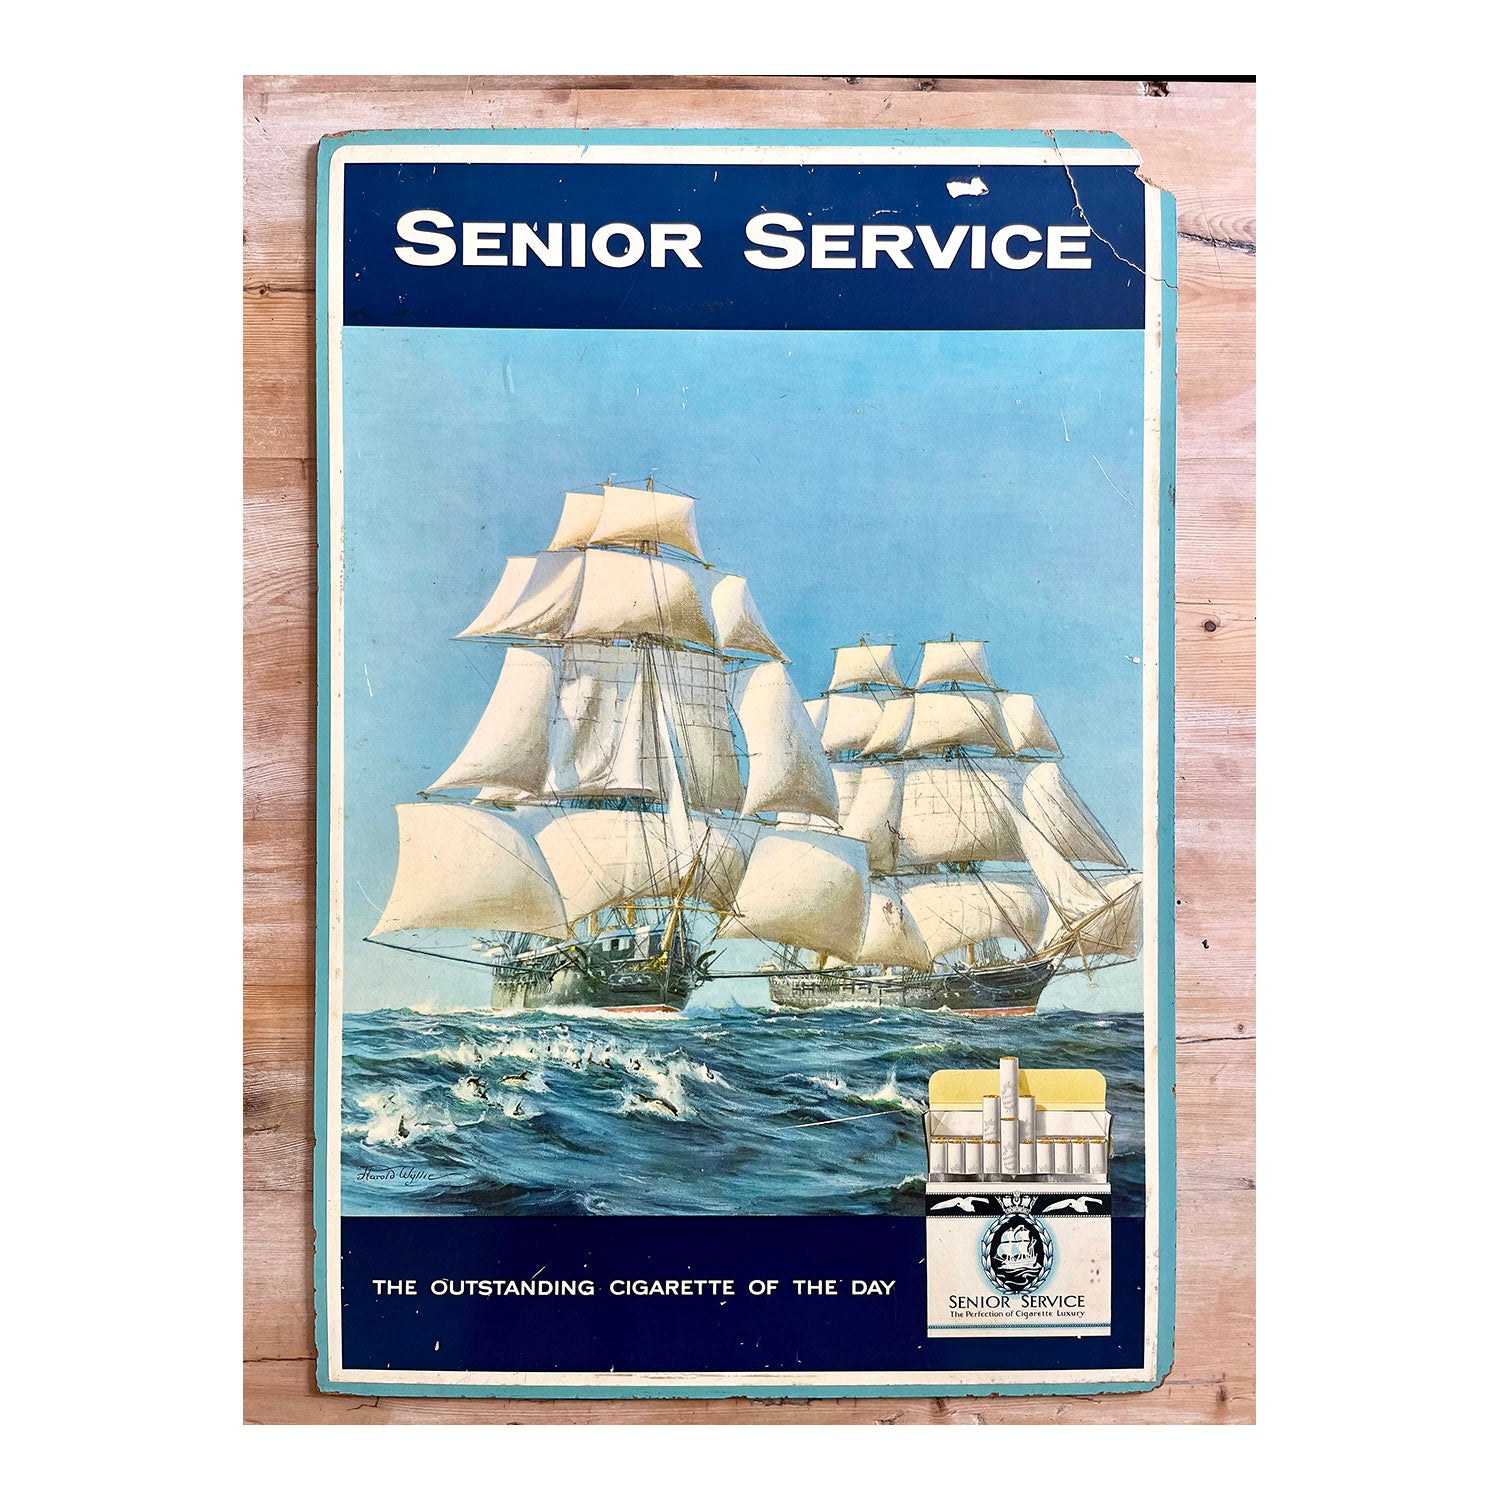 original Senior Service cigarettes fibre board advertising panel, c. 1950. A classic image, depicting two tall-masted ships on the ocean waves with the advertising packaging and slogan at the base.